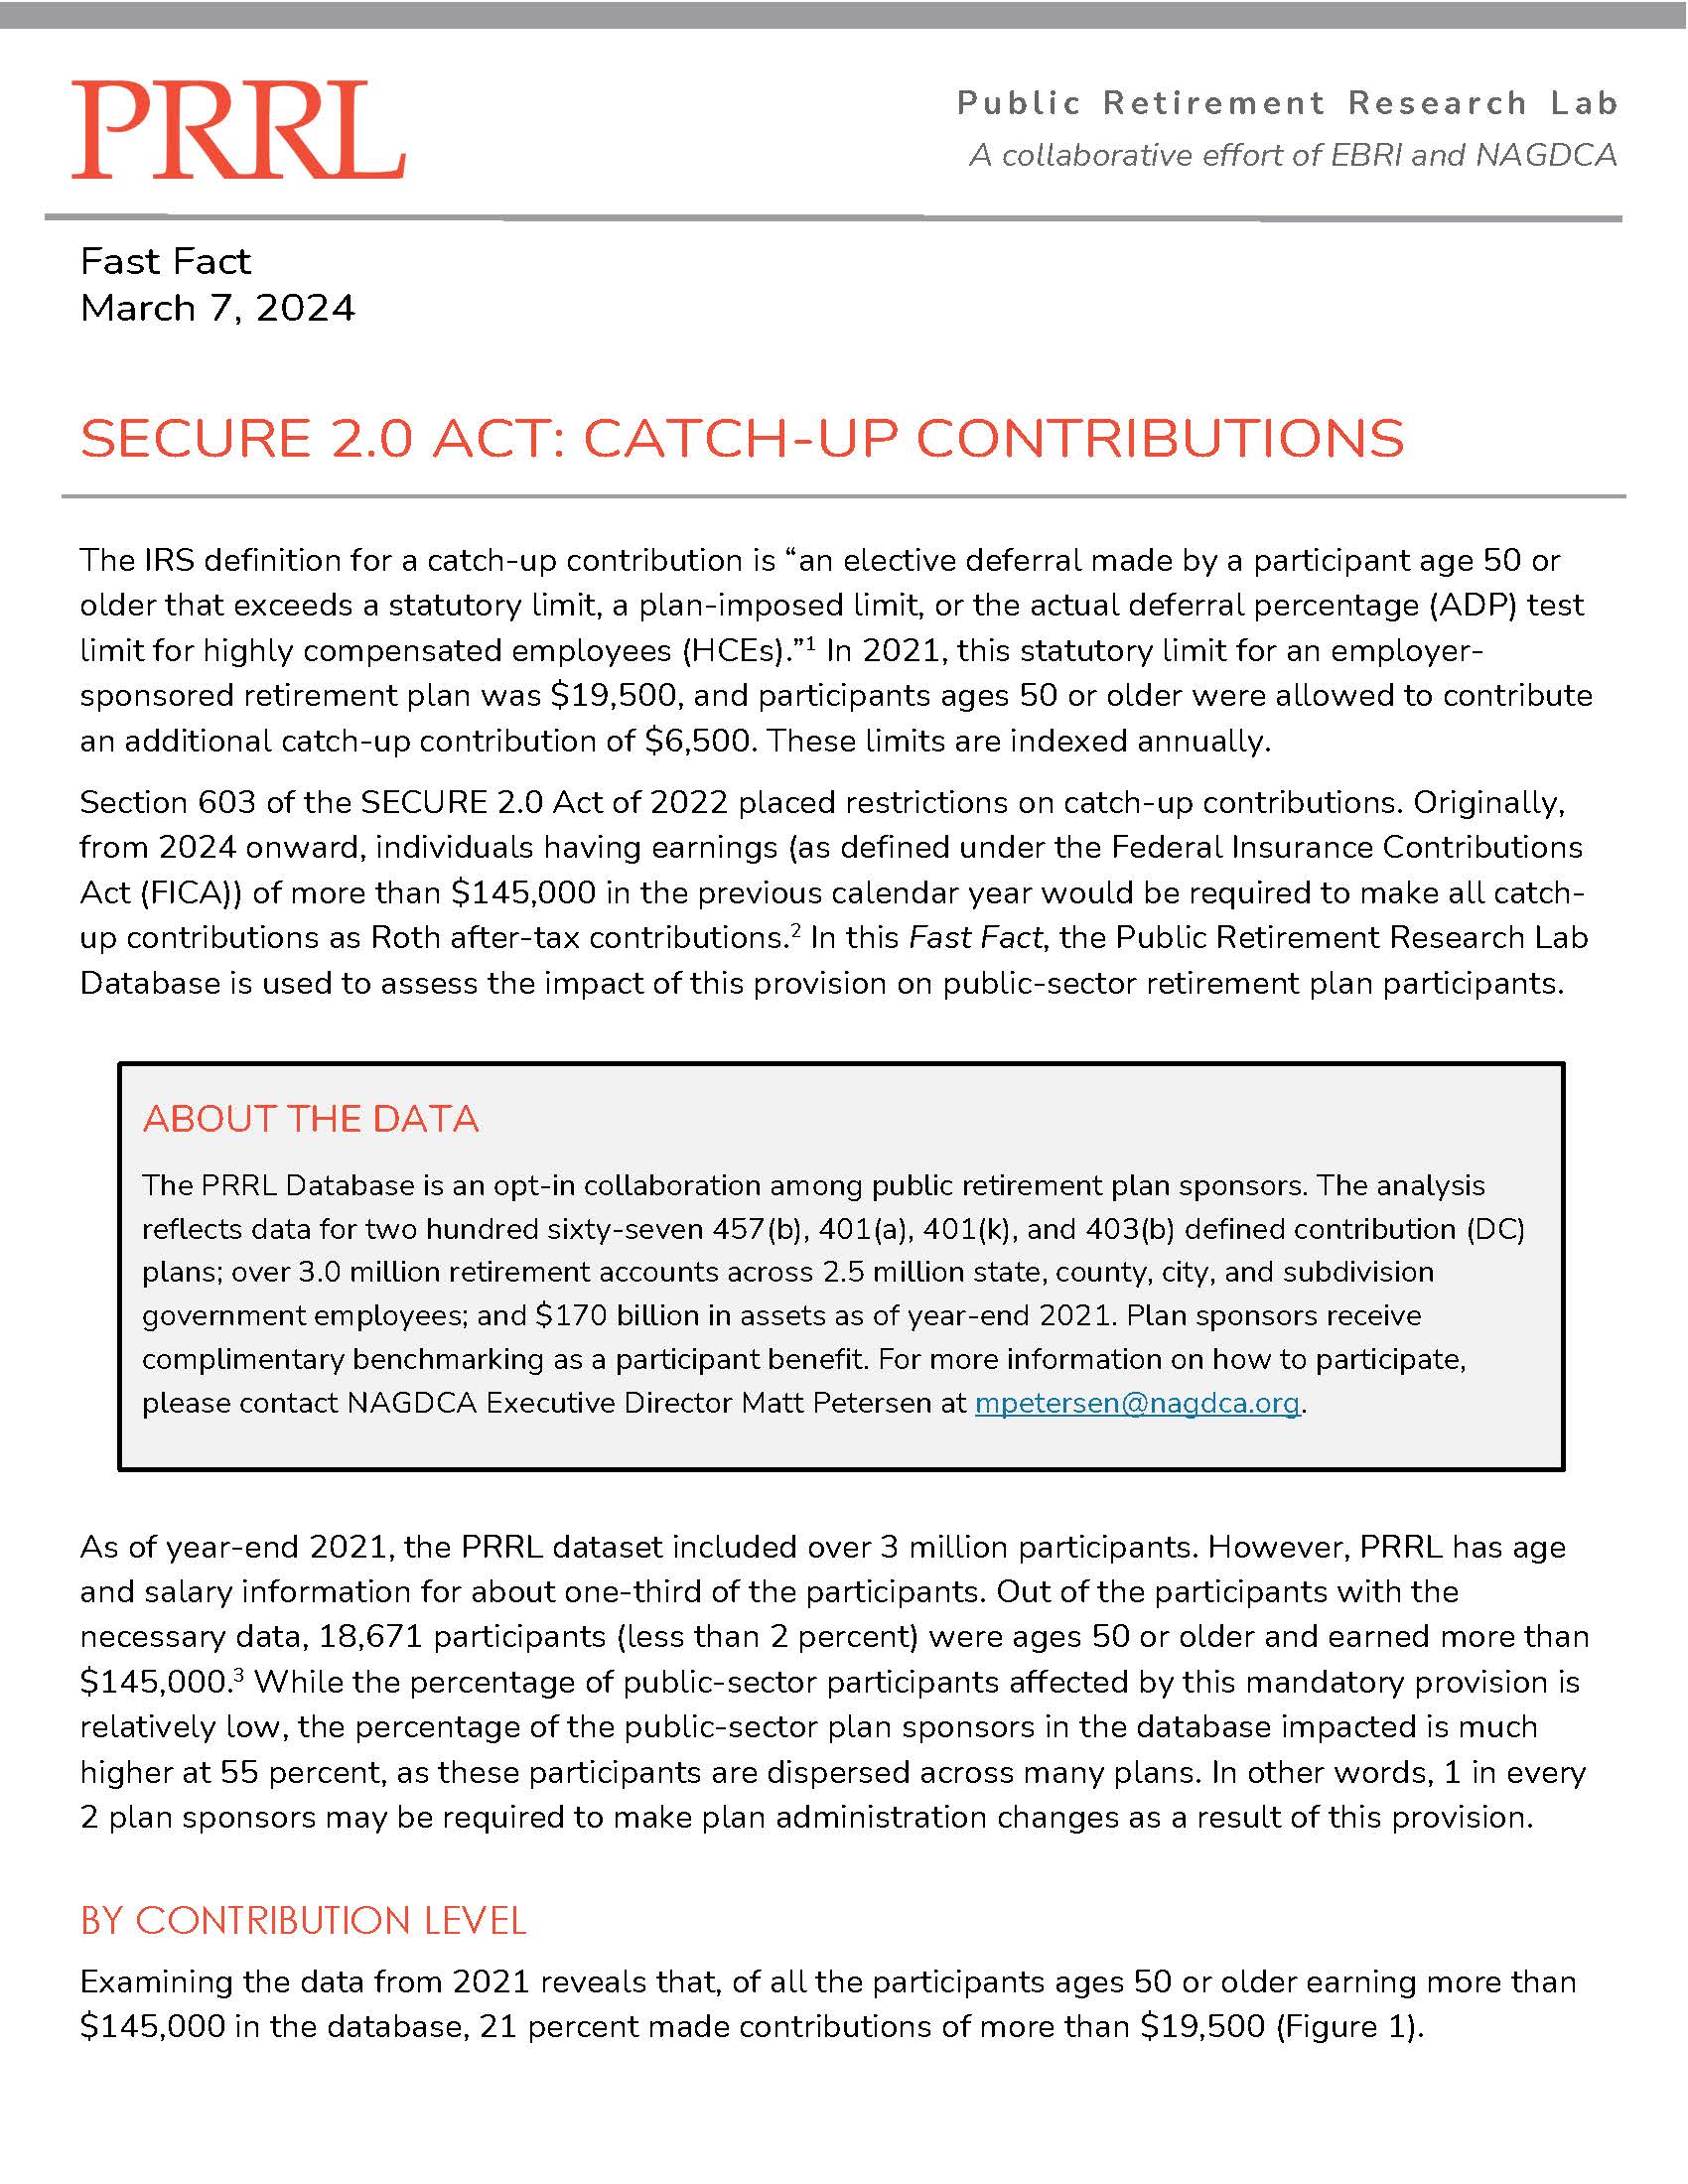 Fast Fact SECURE 2.0 Act Catchup Contributions NAGDCA